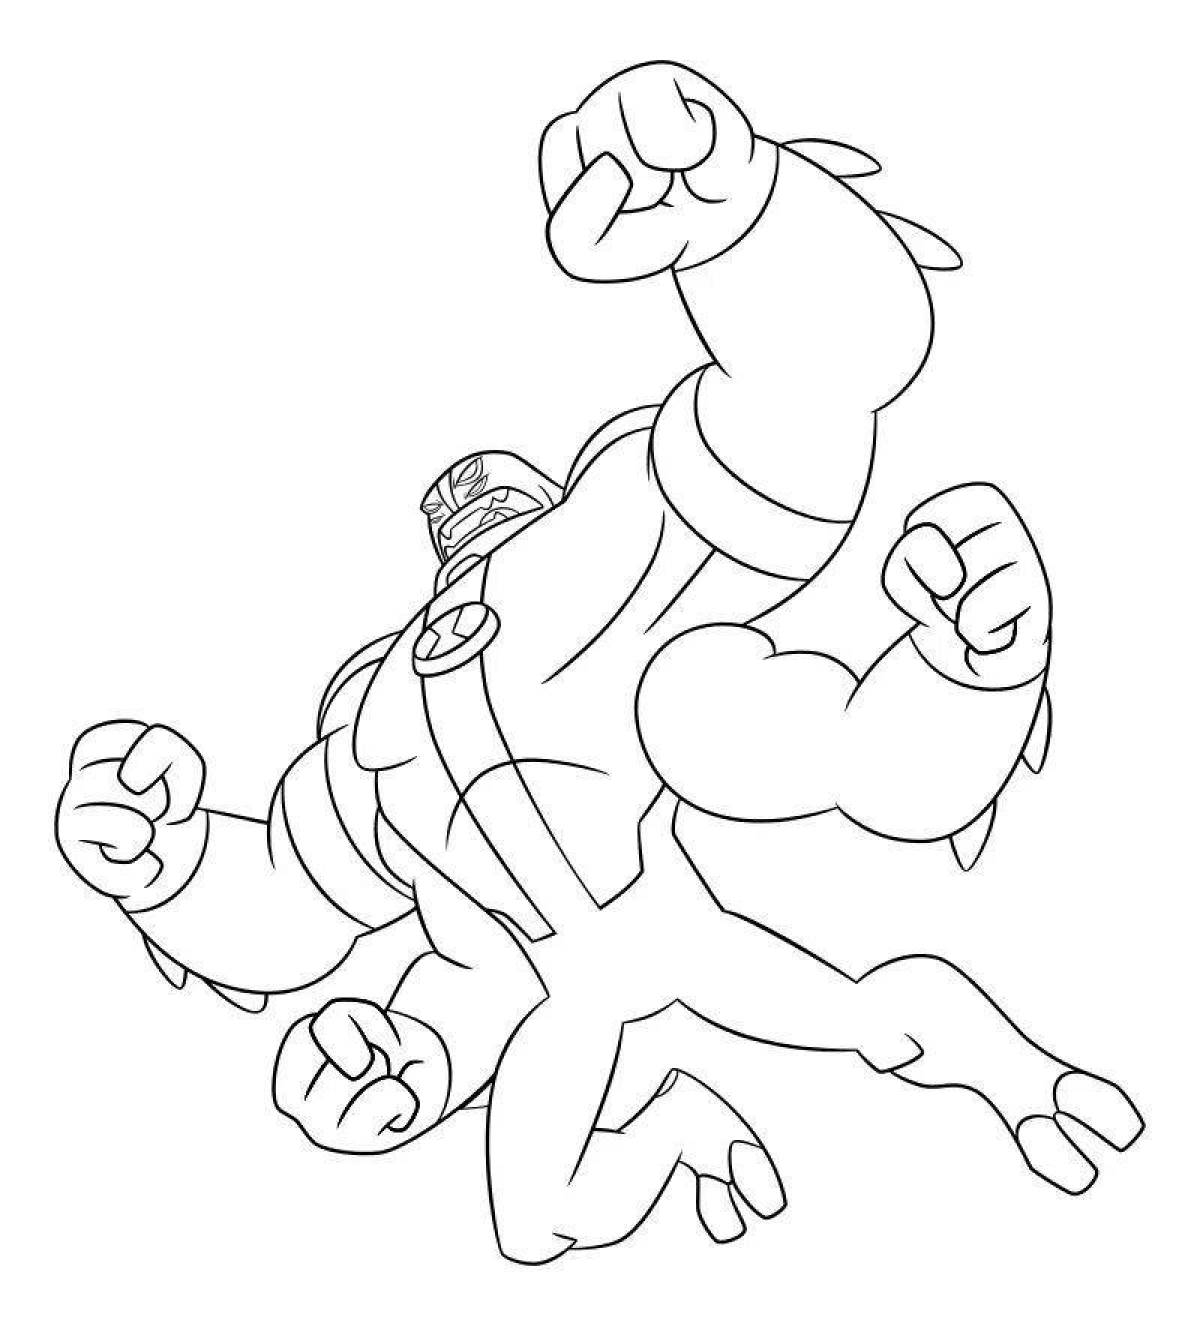 Detailed gujitso coloring page